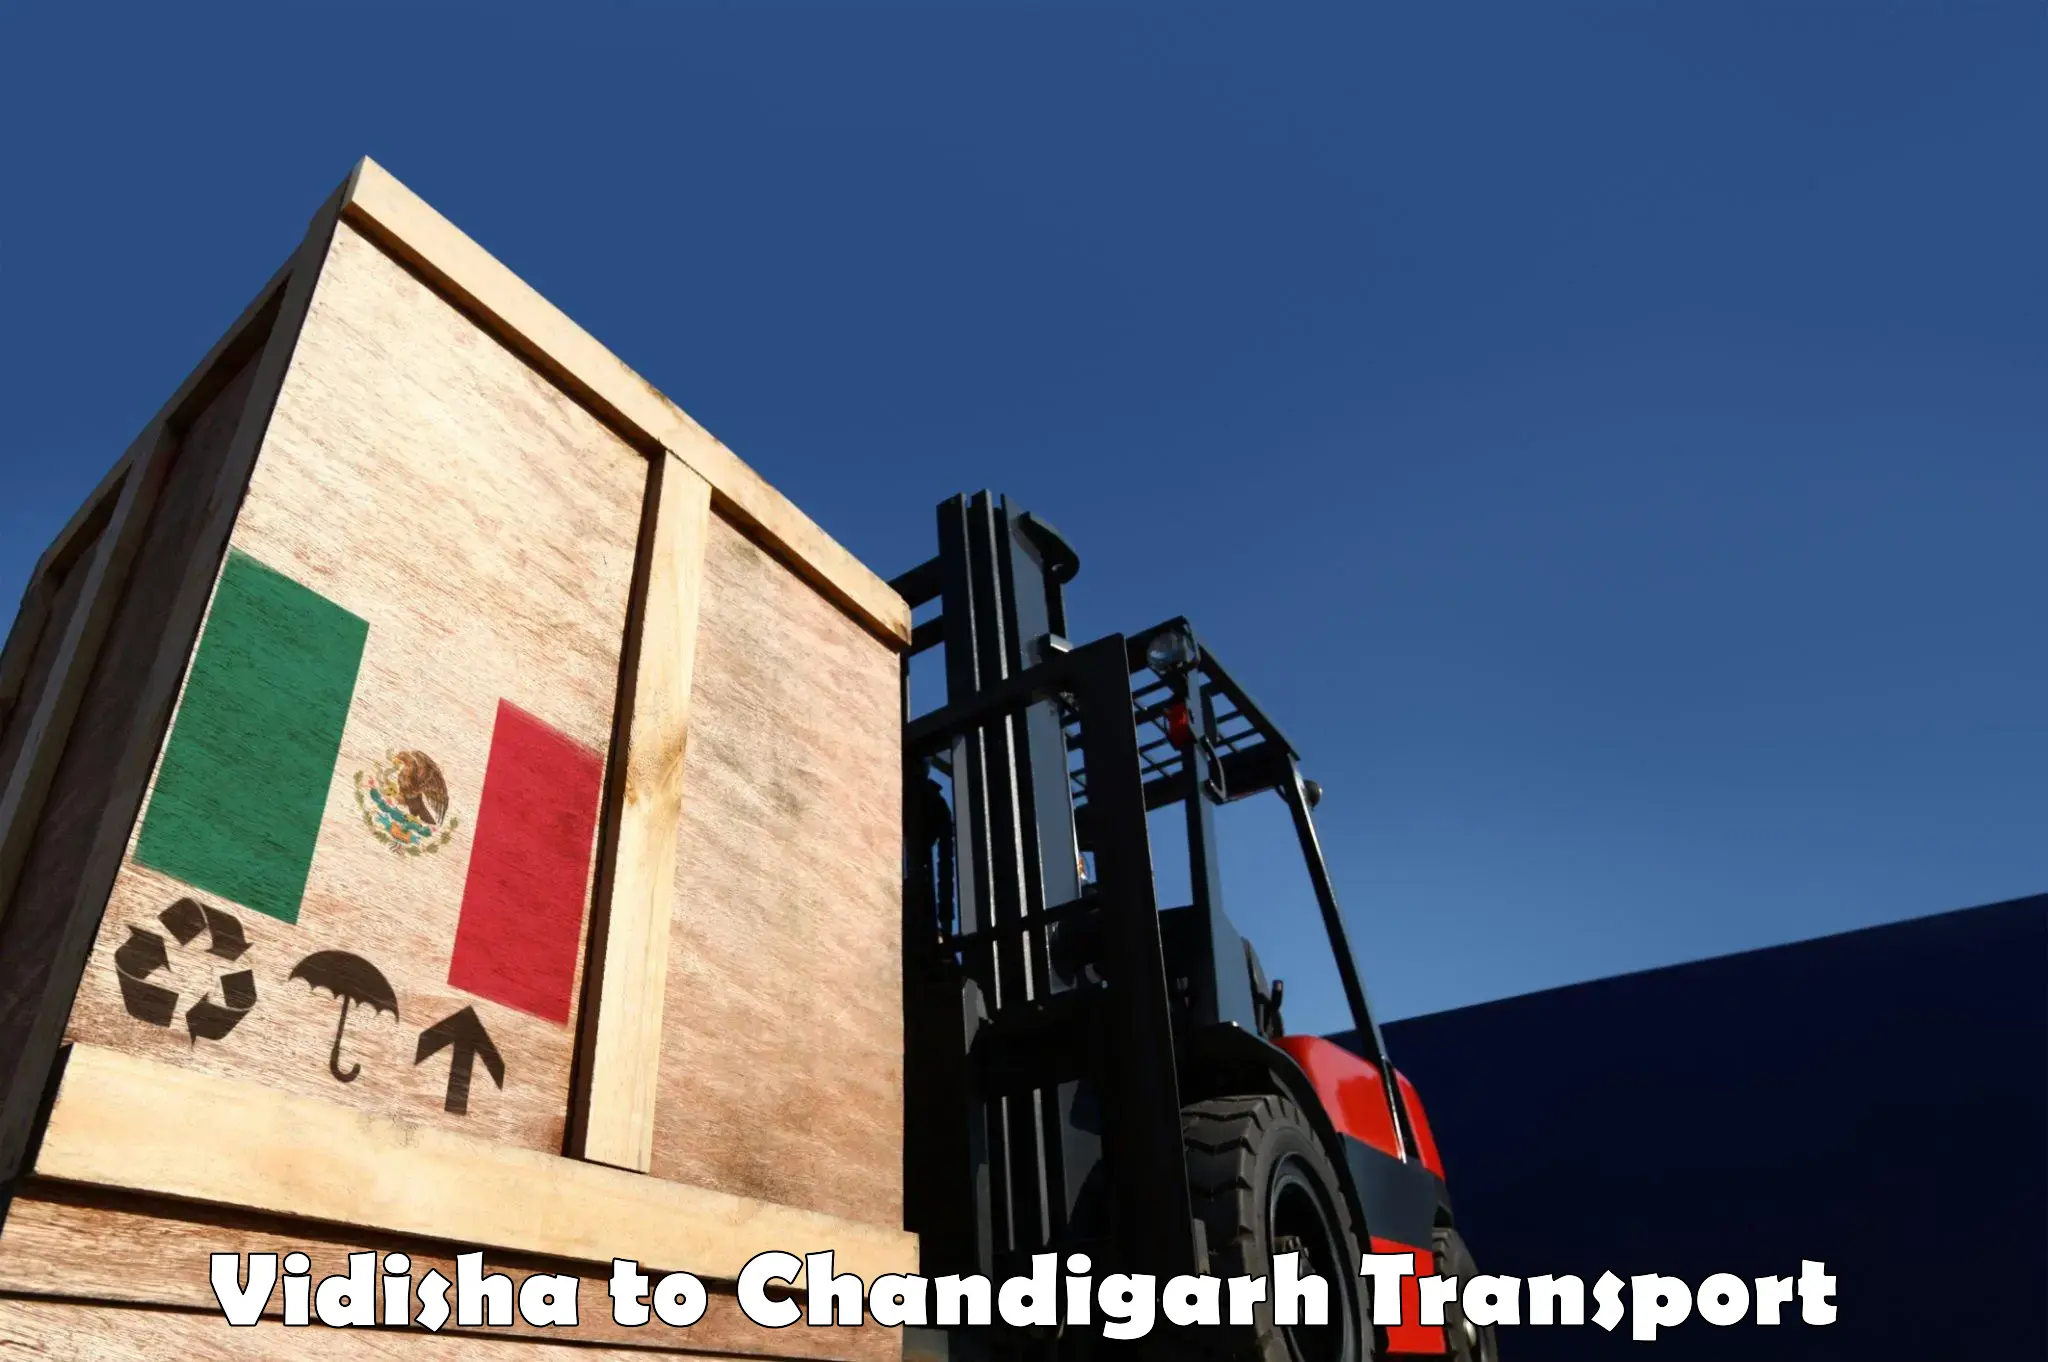 Transport bike from one state to another Vidisha to Chandigarh